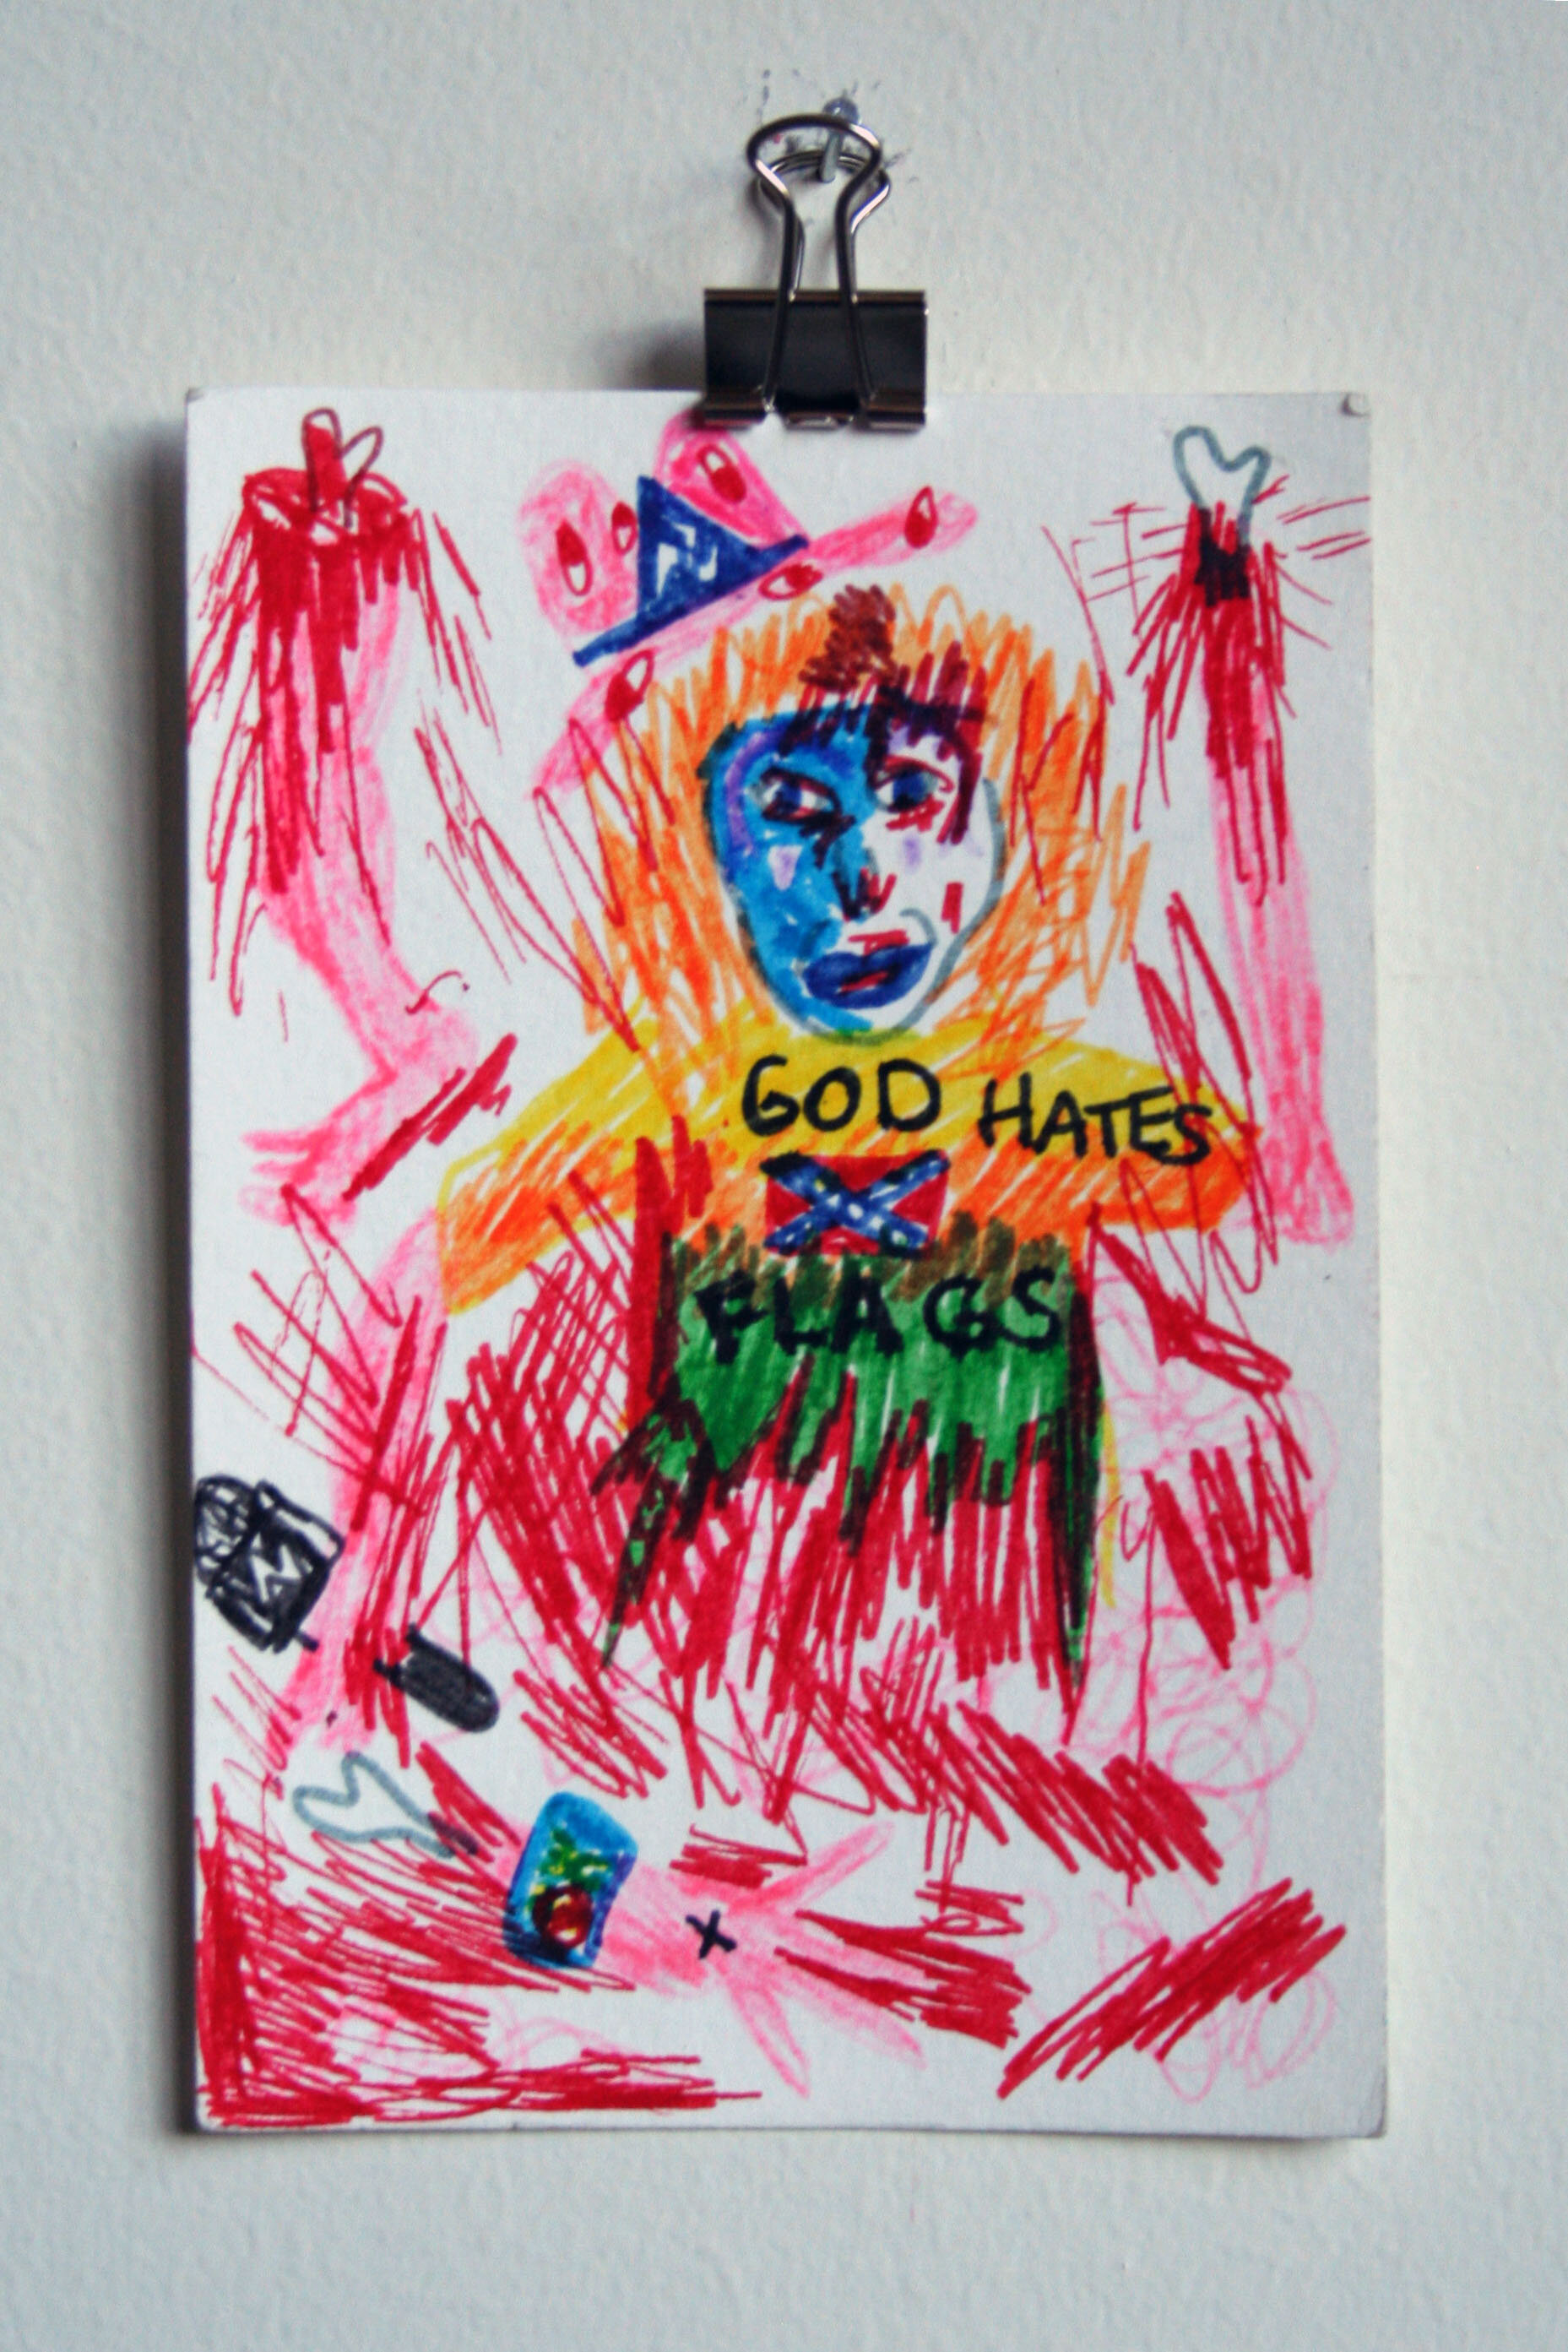   God Hates Flags God Hates Old Put , 2015  6 x 4 inches (15.24 x 10.16 cm.)  Marker on paper 